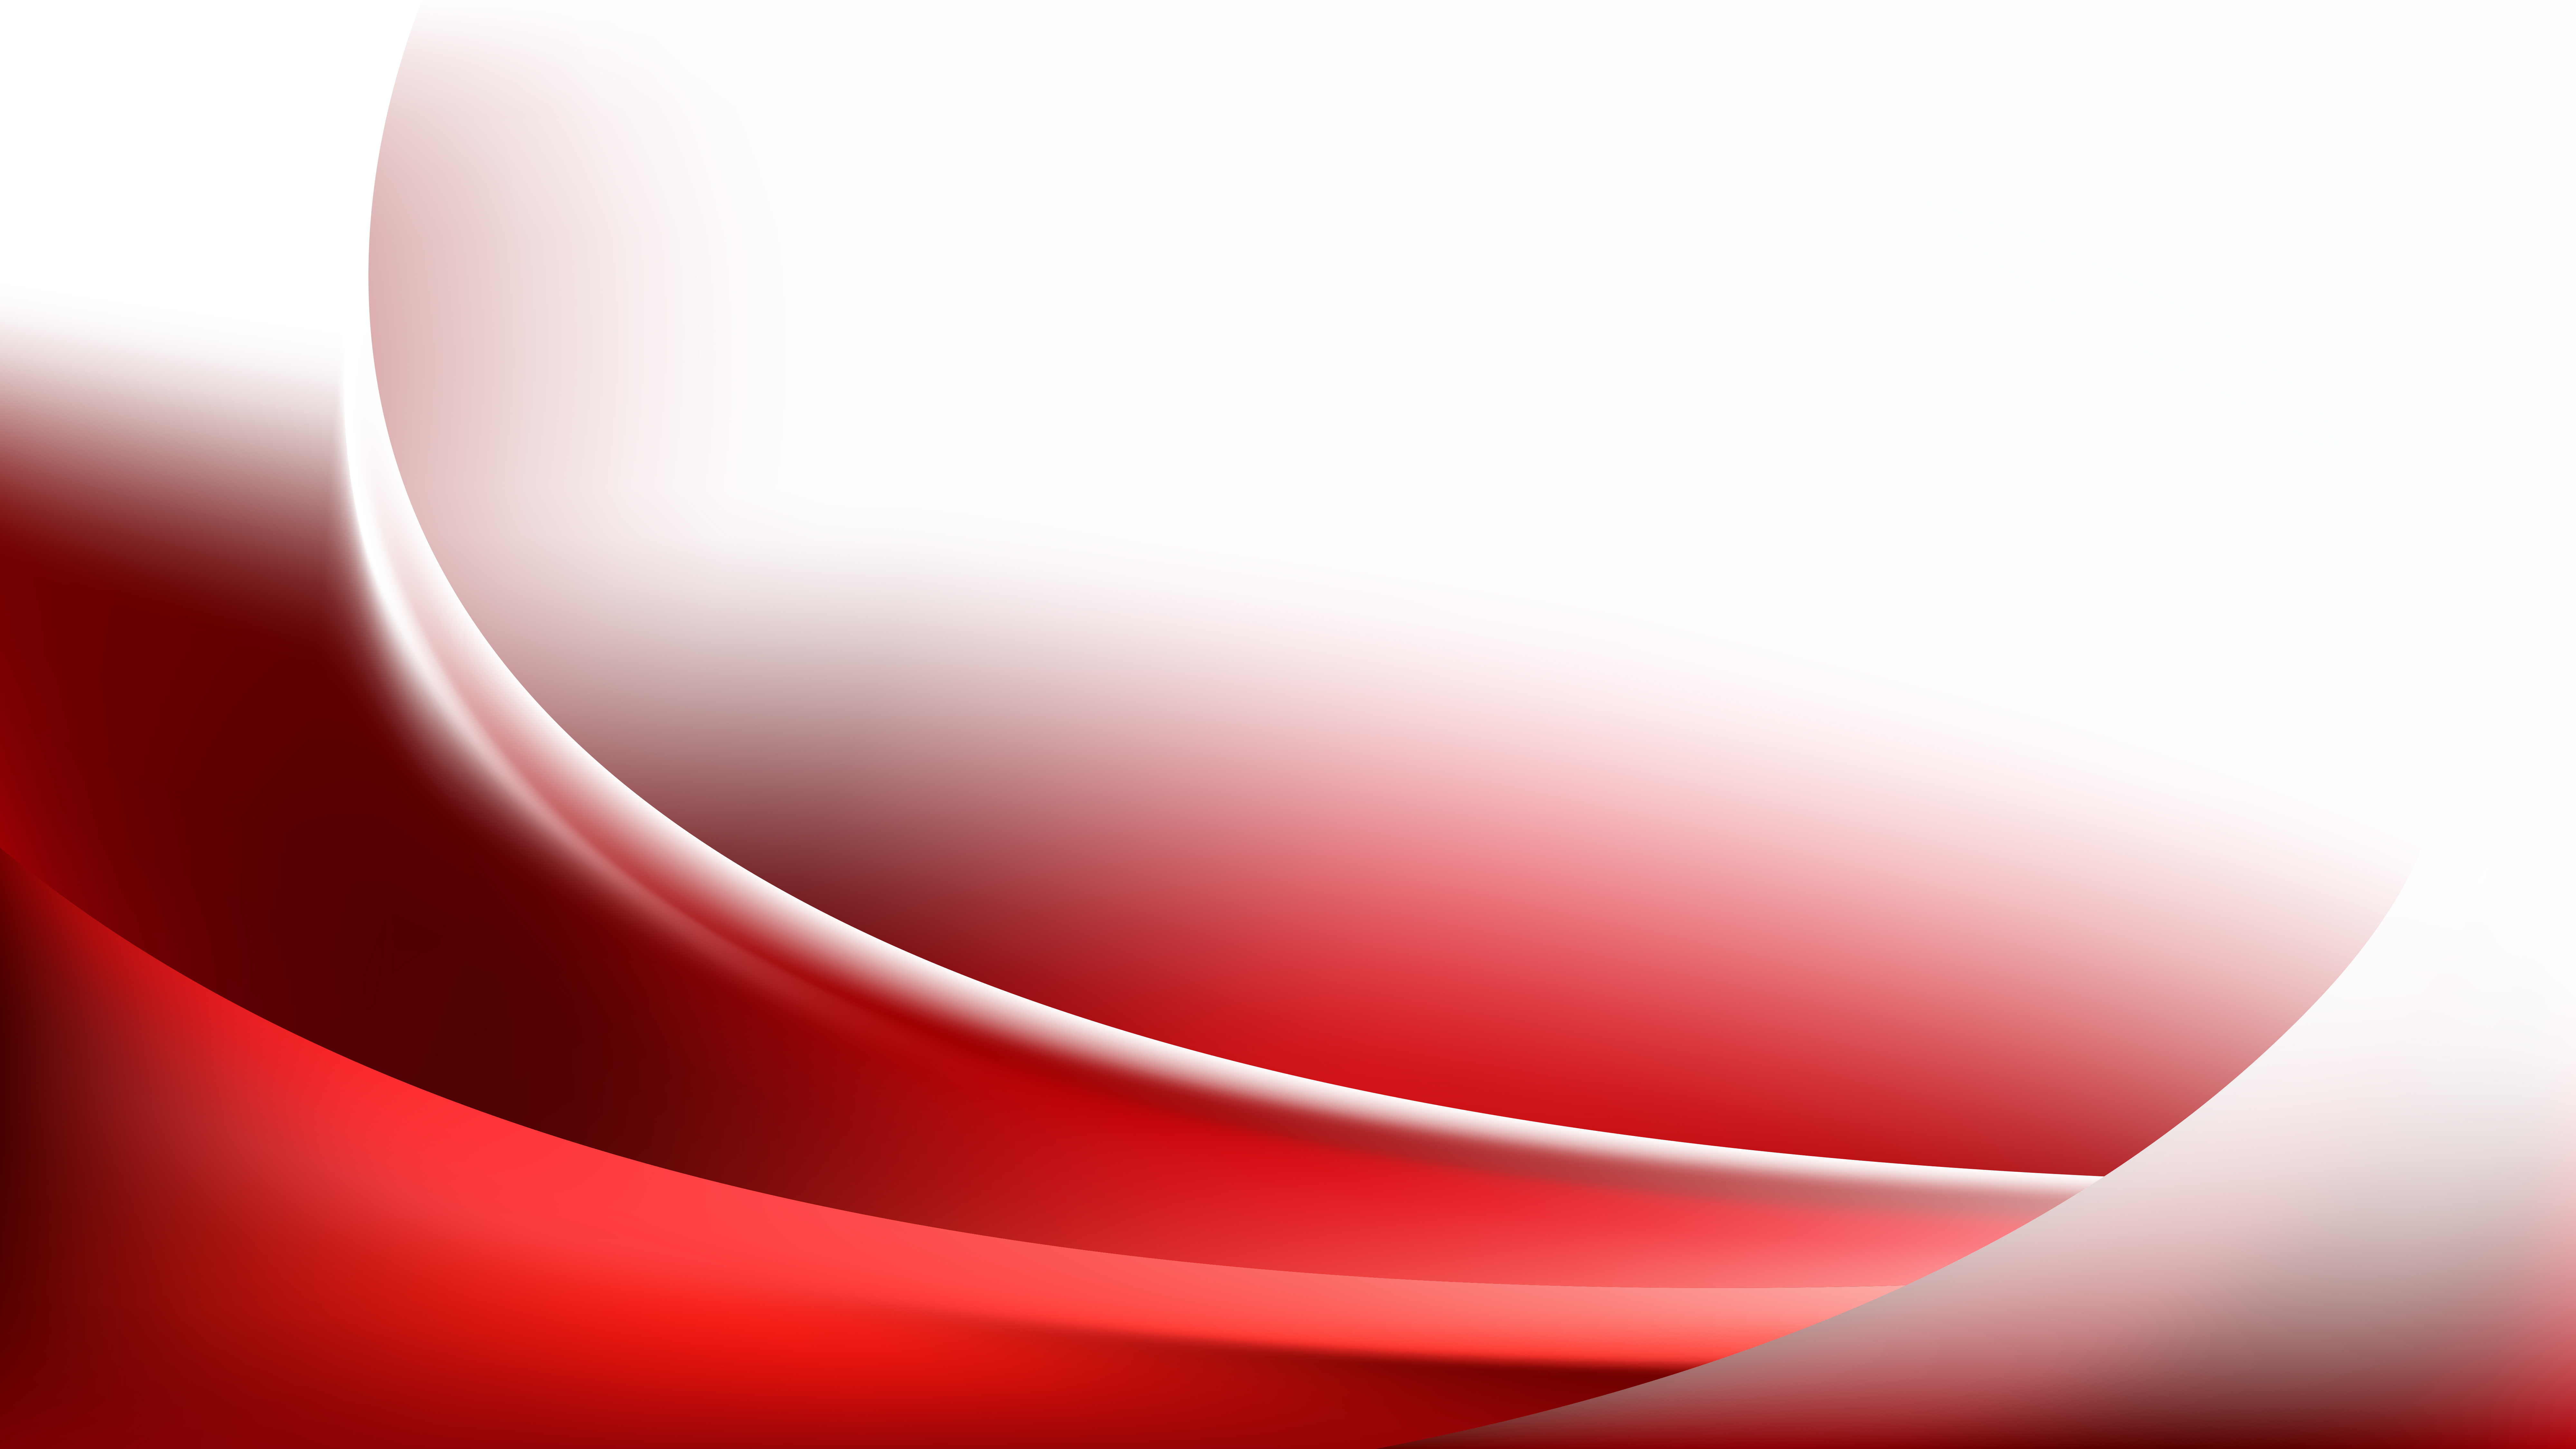 Abstract Red And White Curve Background Vector Illustration